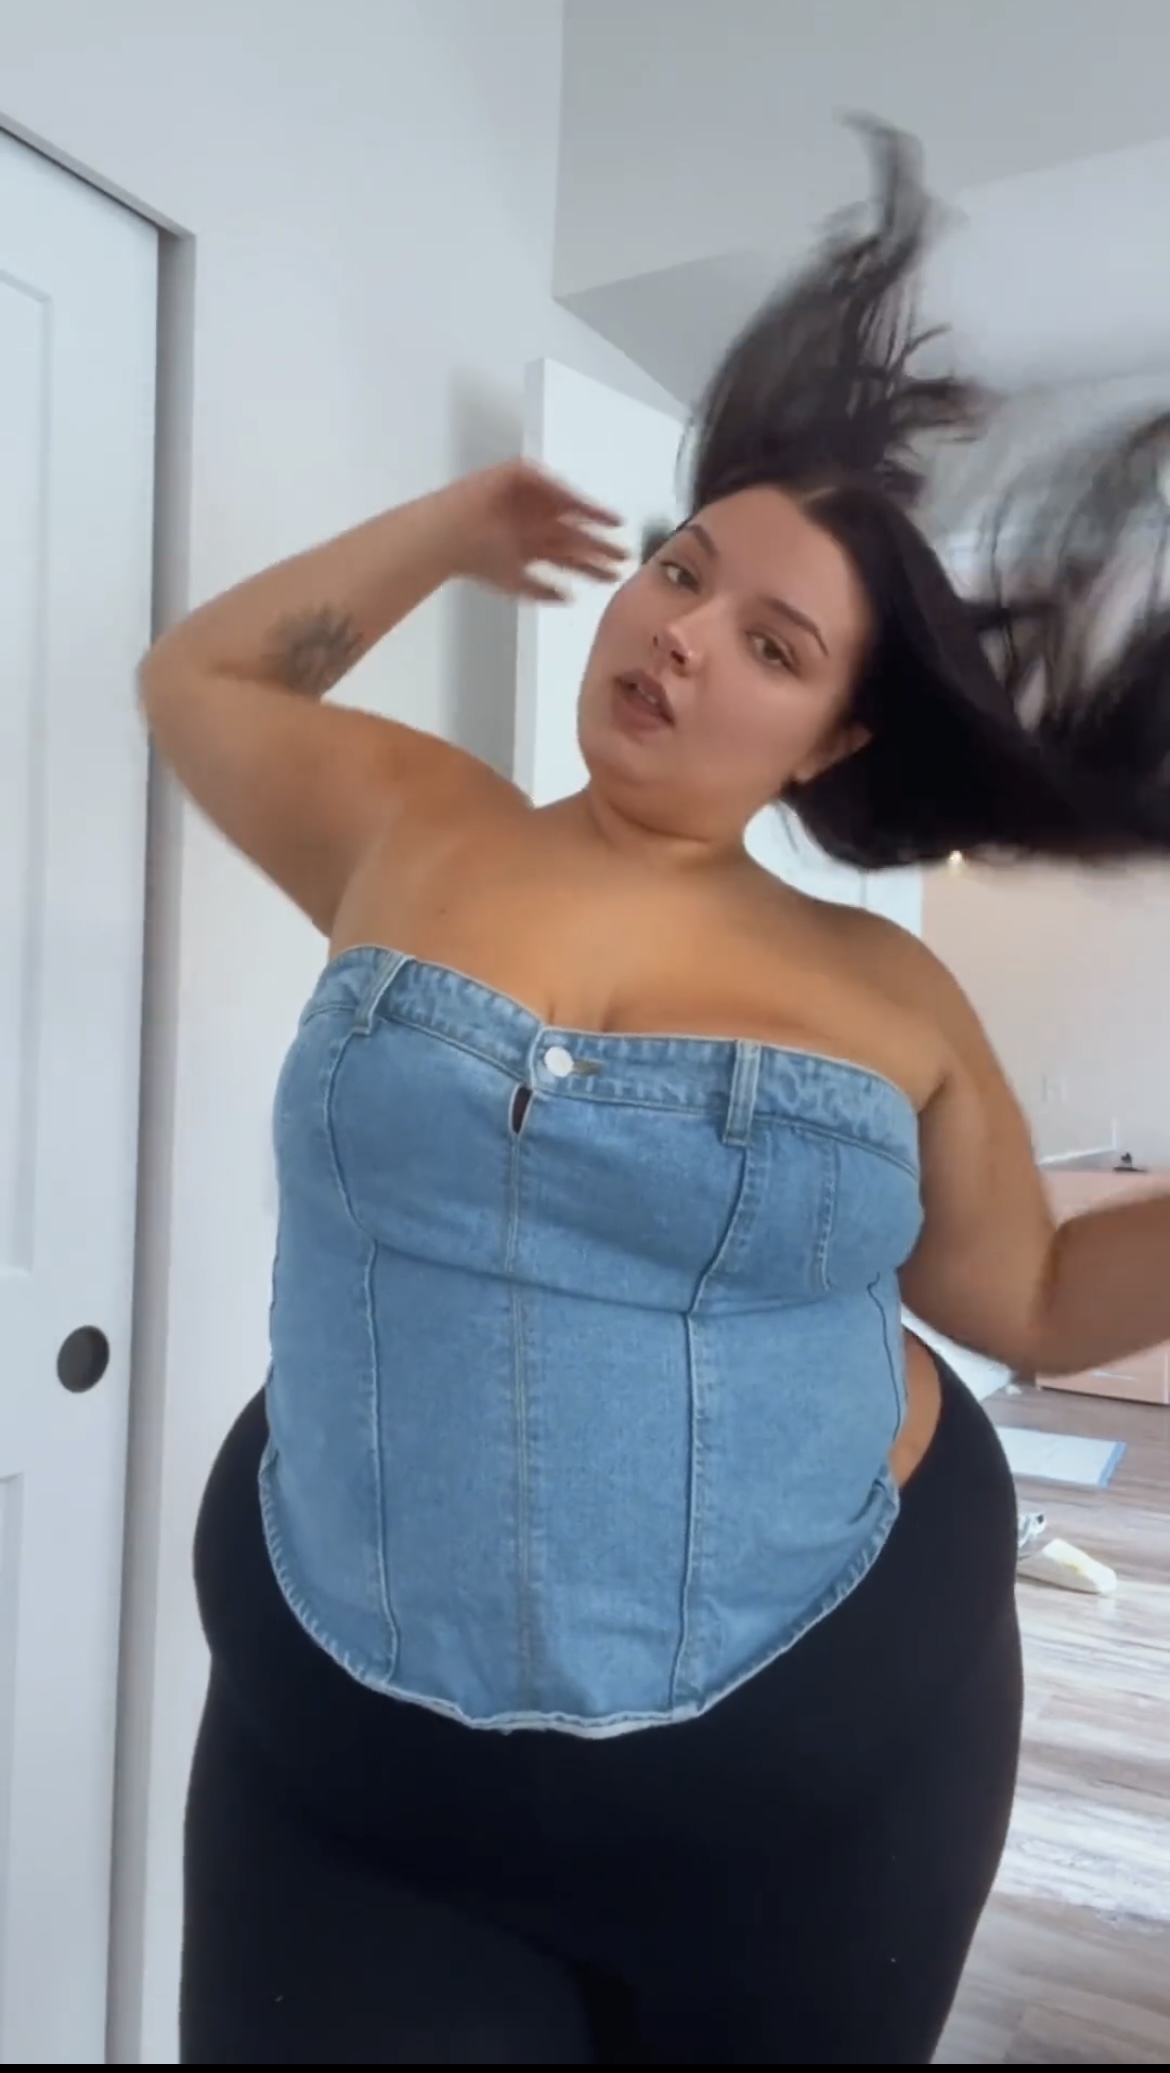 Bbw doesn’t fit into clothes